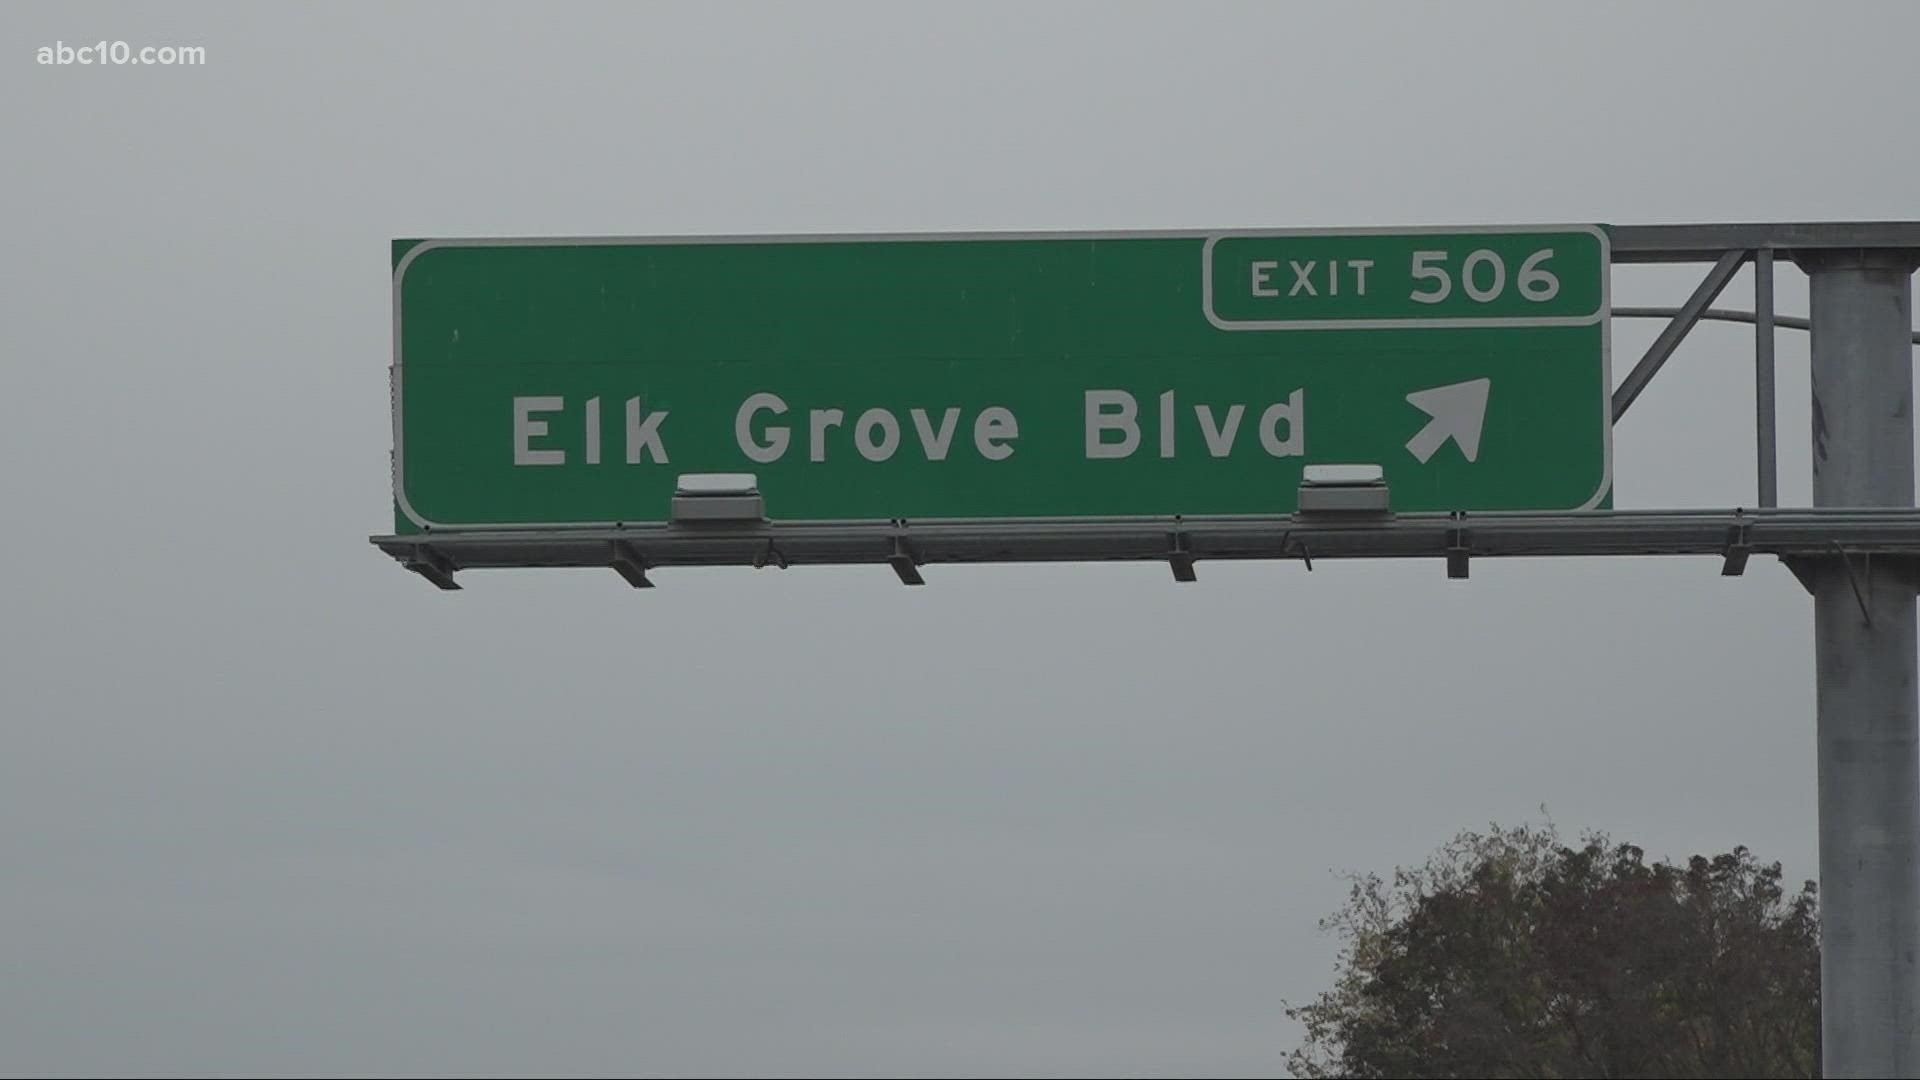 The guardrails are located at the off-ramp on Elk Grove Boulevard, heading southbound on I-5.